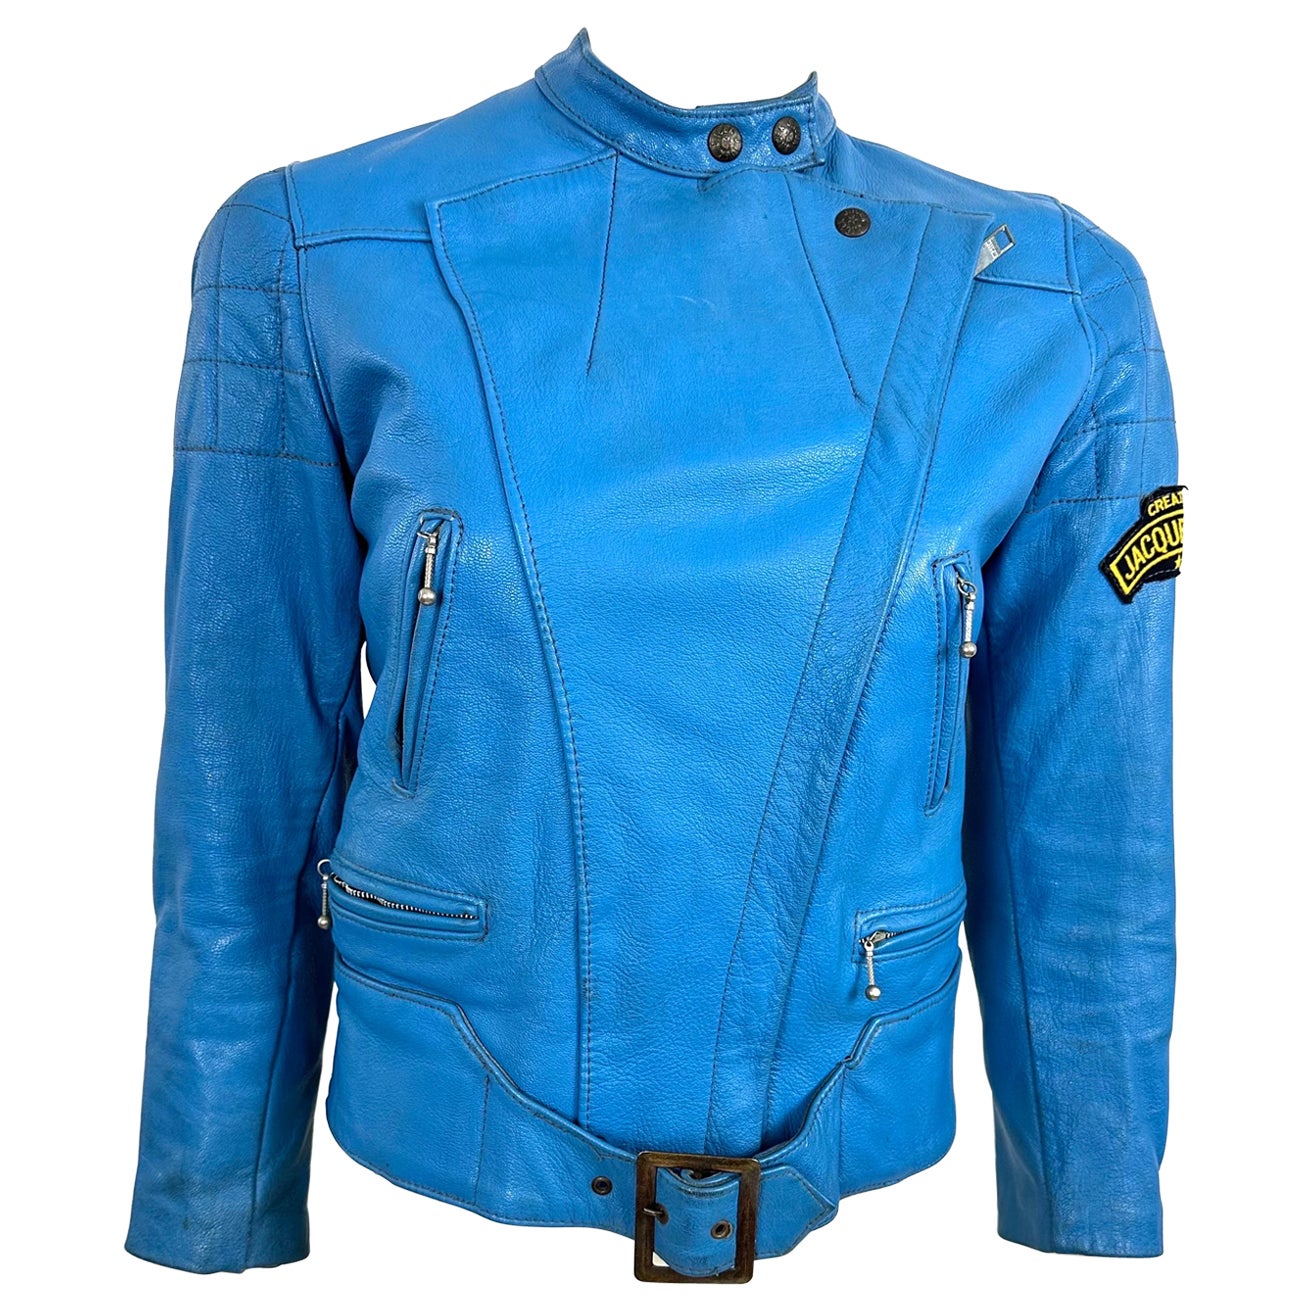 Rare Jacques Icek biker leather jacket from the 70s For Sale